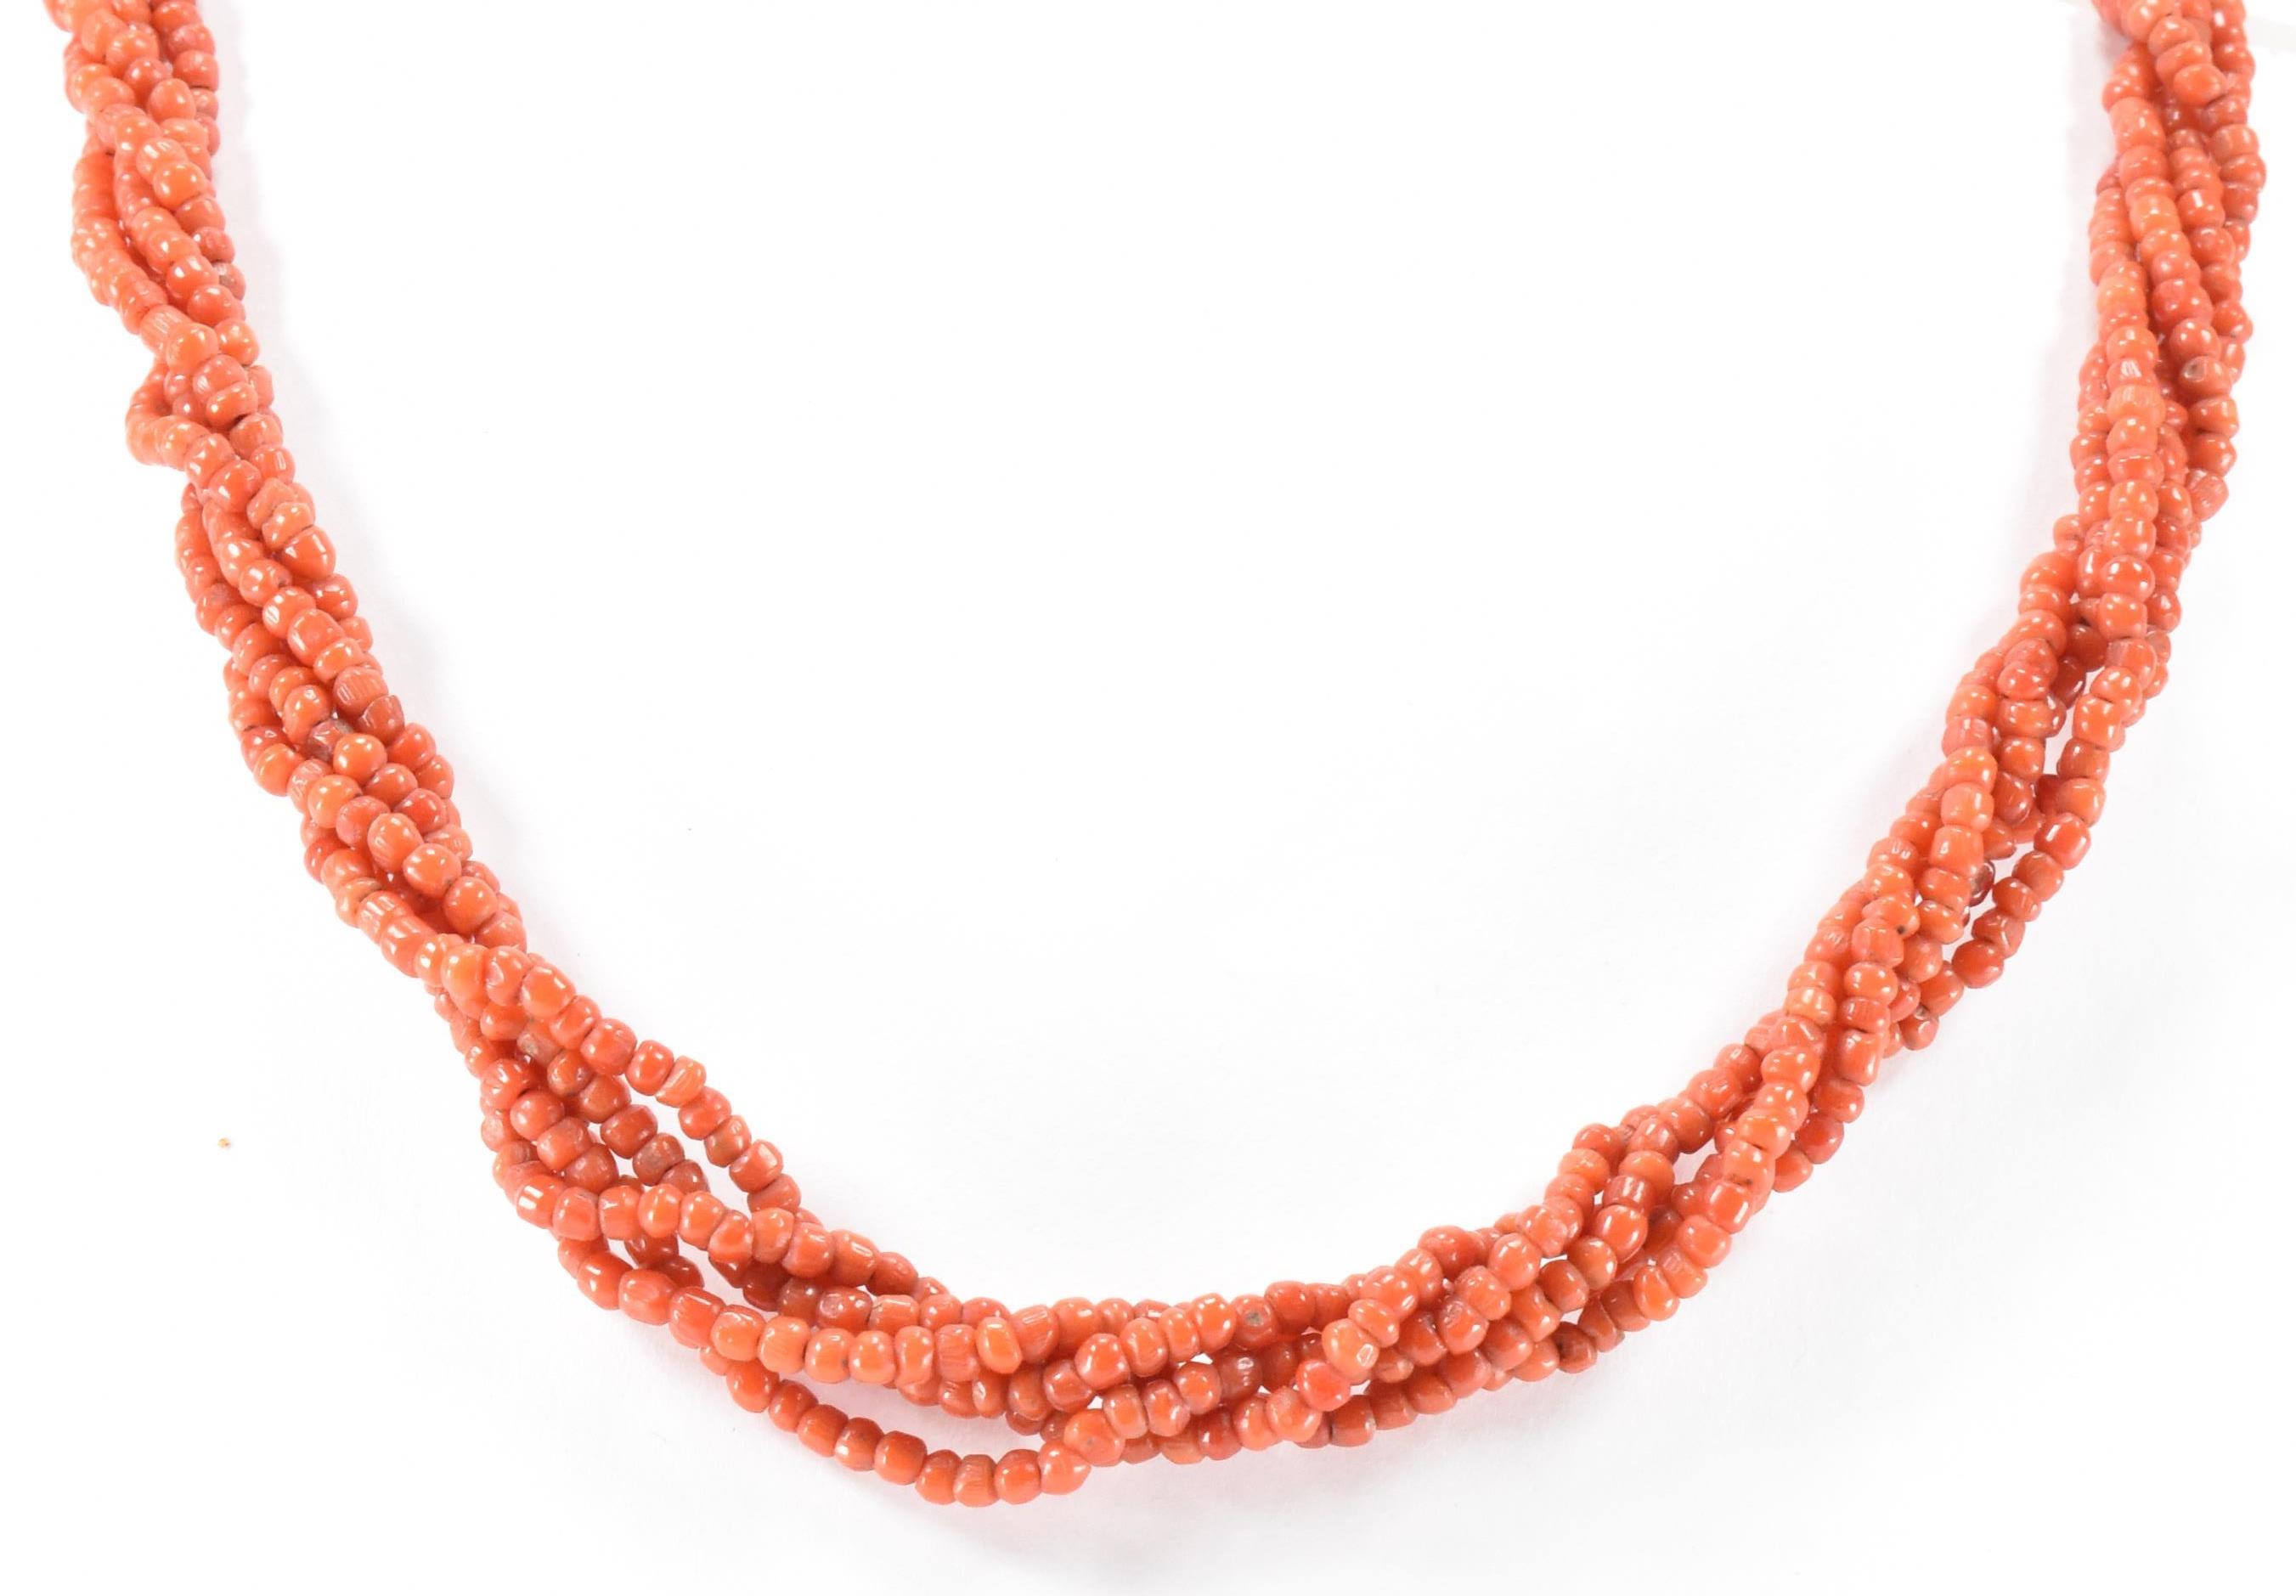 VICTORIAN GOLD & CORAL NECKLACE - Image 4 of 5